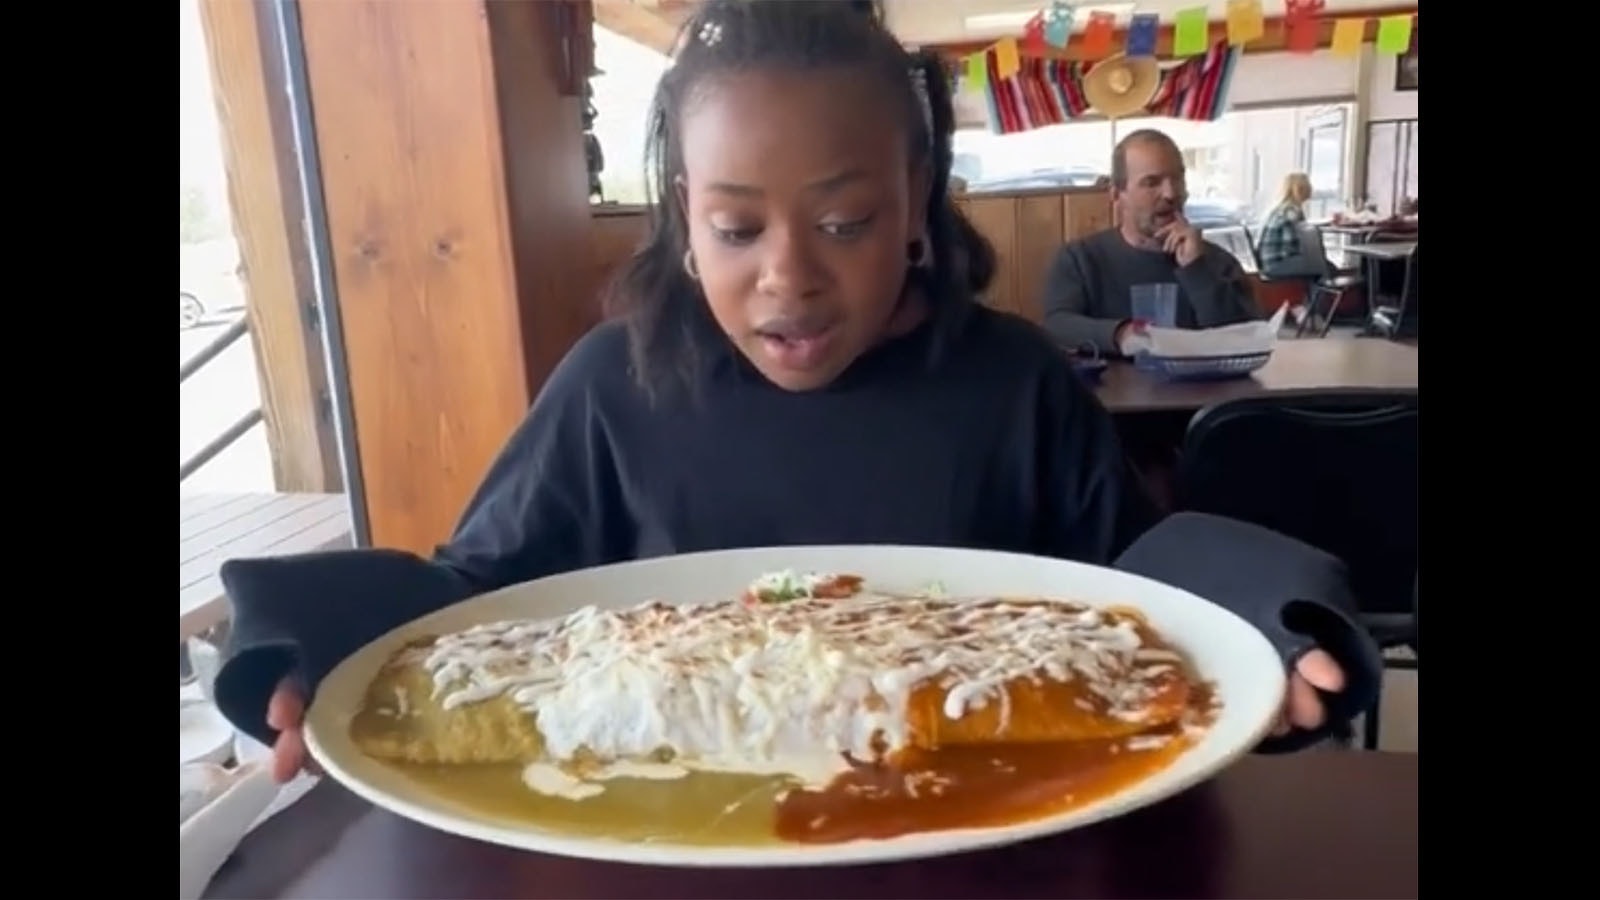 TikToker @angelboydnyc posted a video of her attempt to eat the 5-pound burrito at Michael's Tacos in Cody, Wyoming.